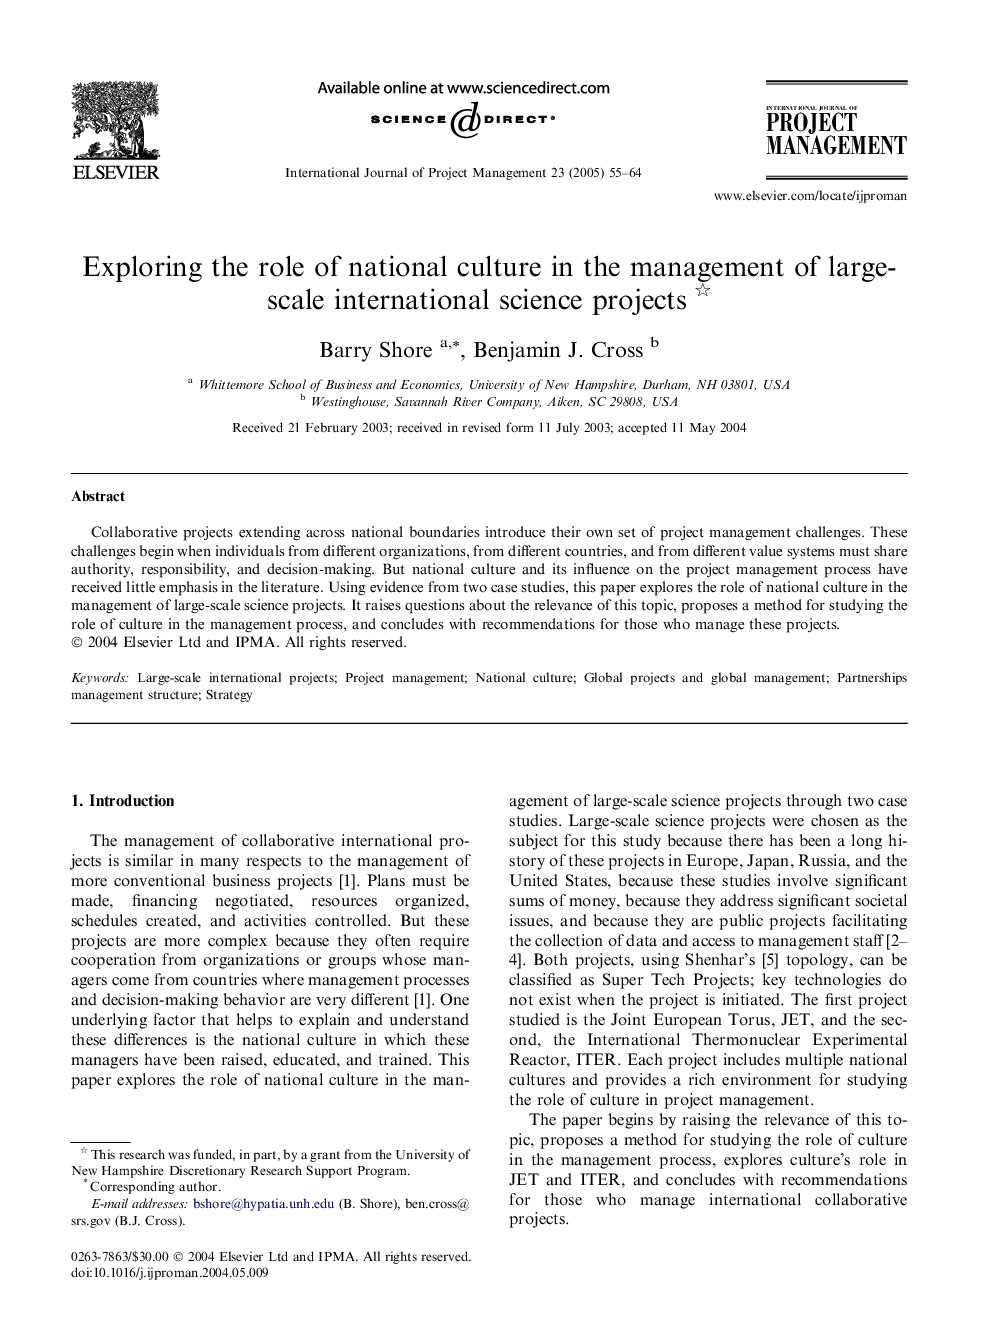 Exploring the role of national culture in the management of large-scale international science projects